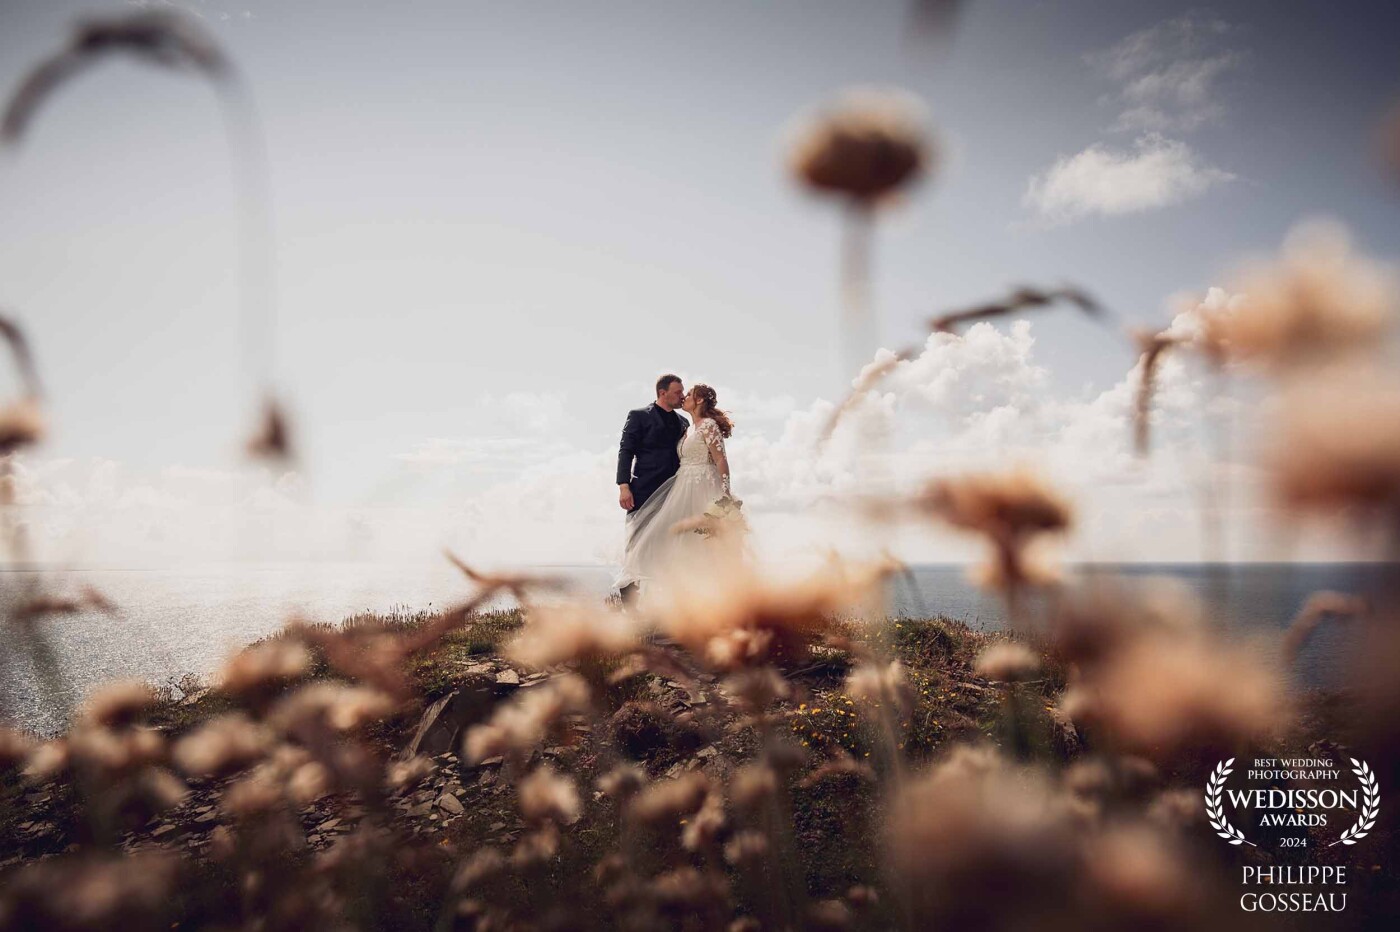 Becki and Jared traveled from the USA to get married on the Cliffs of Moher , on the Wild Atlantic Way with breathtaking views on this lovely summer day.